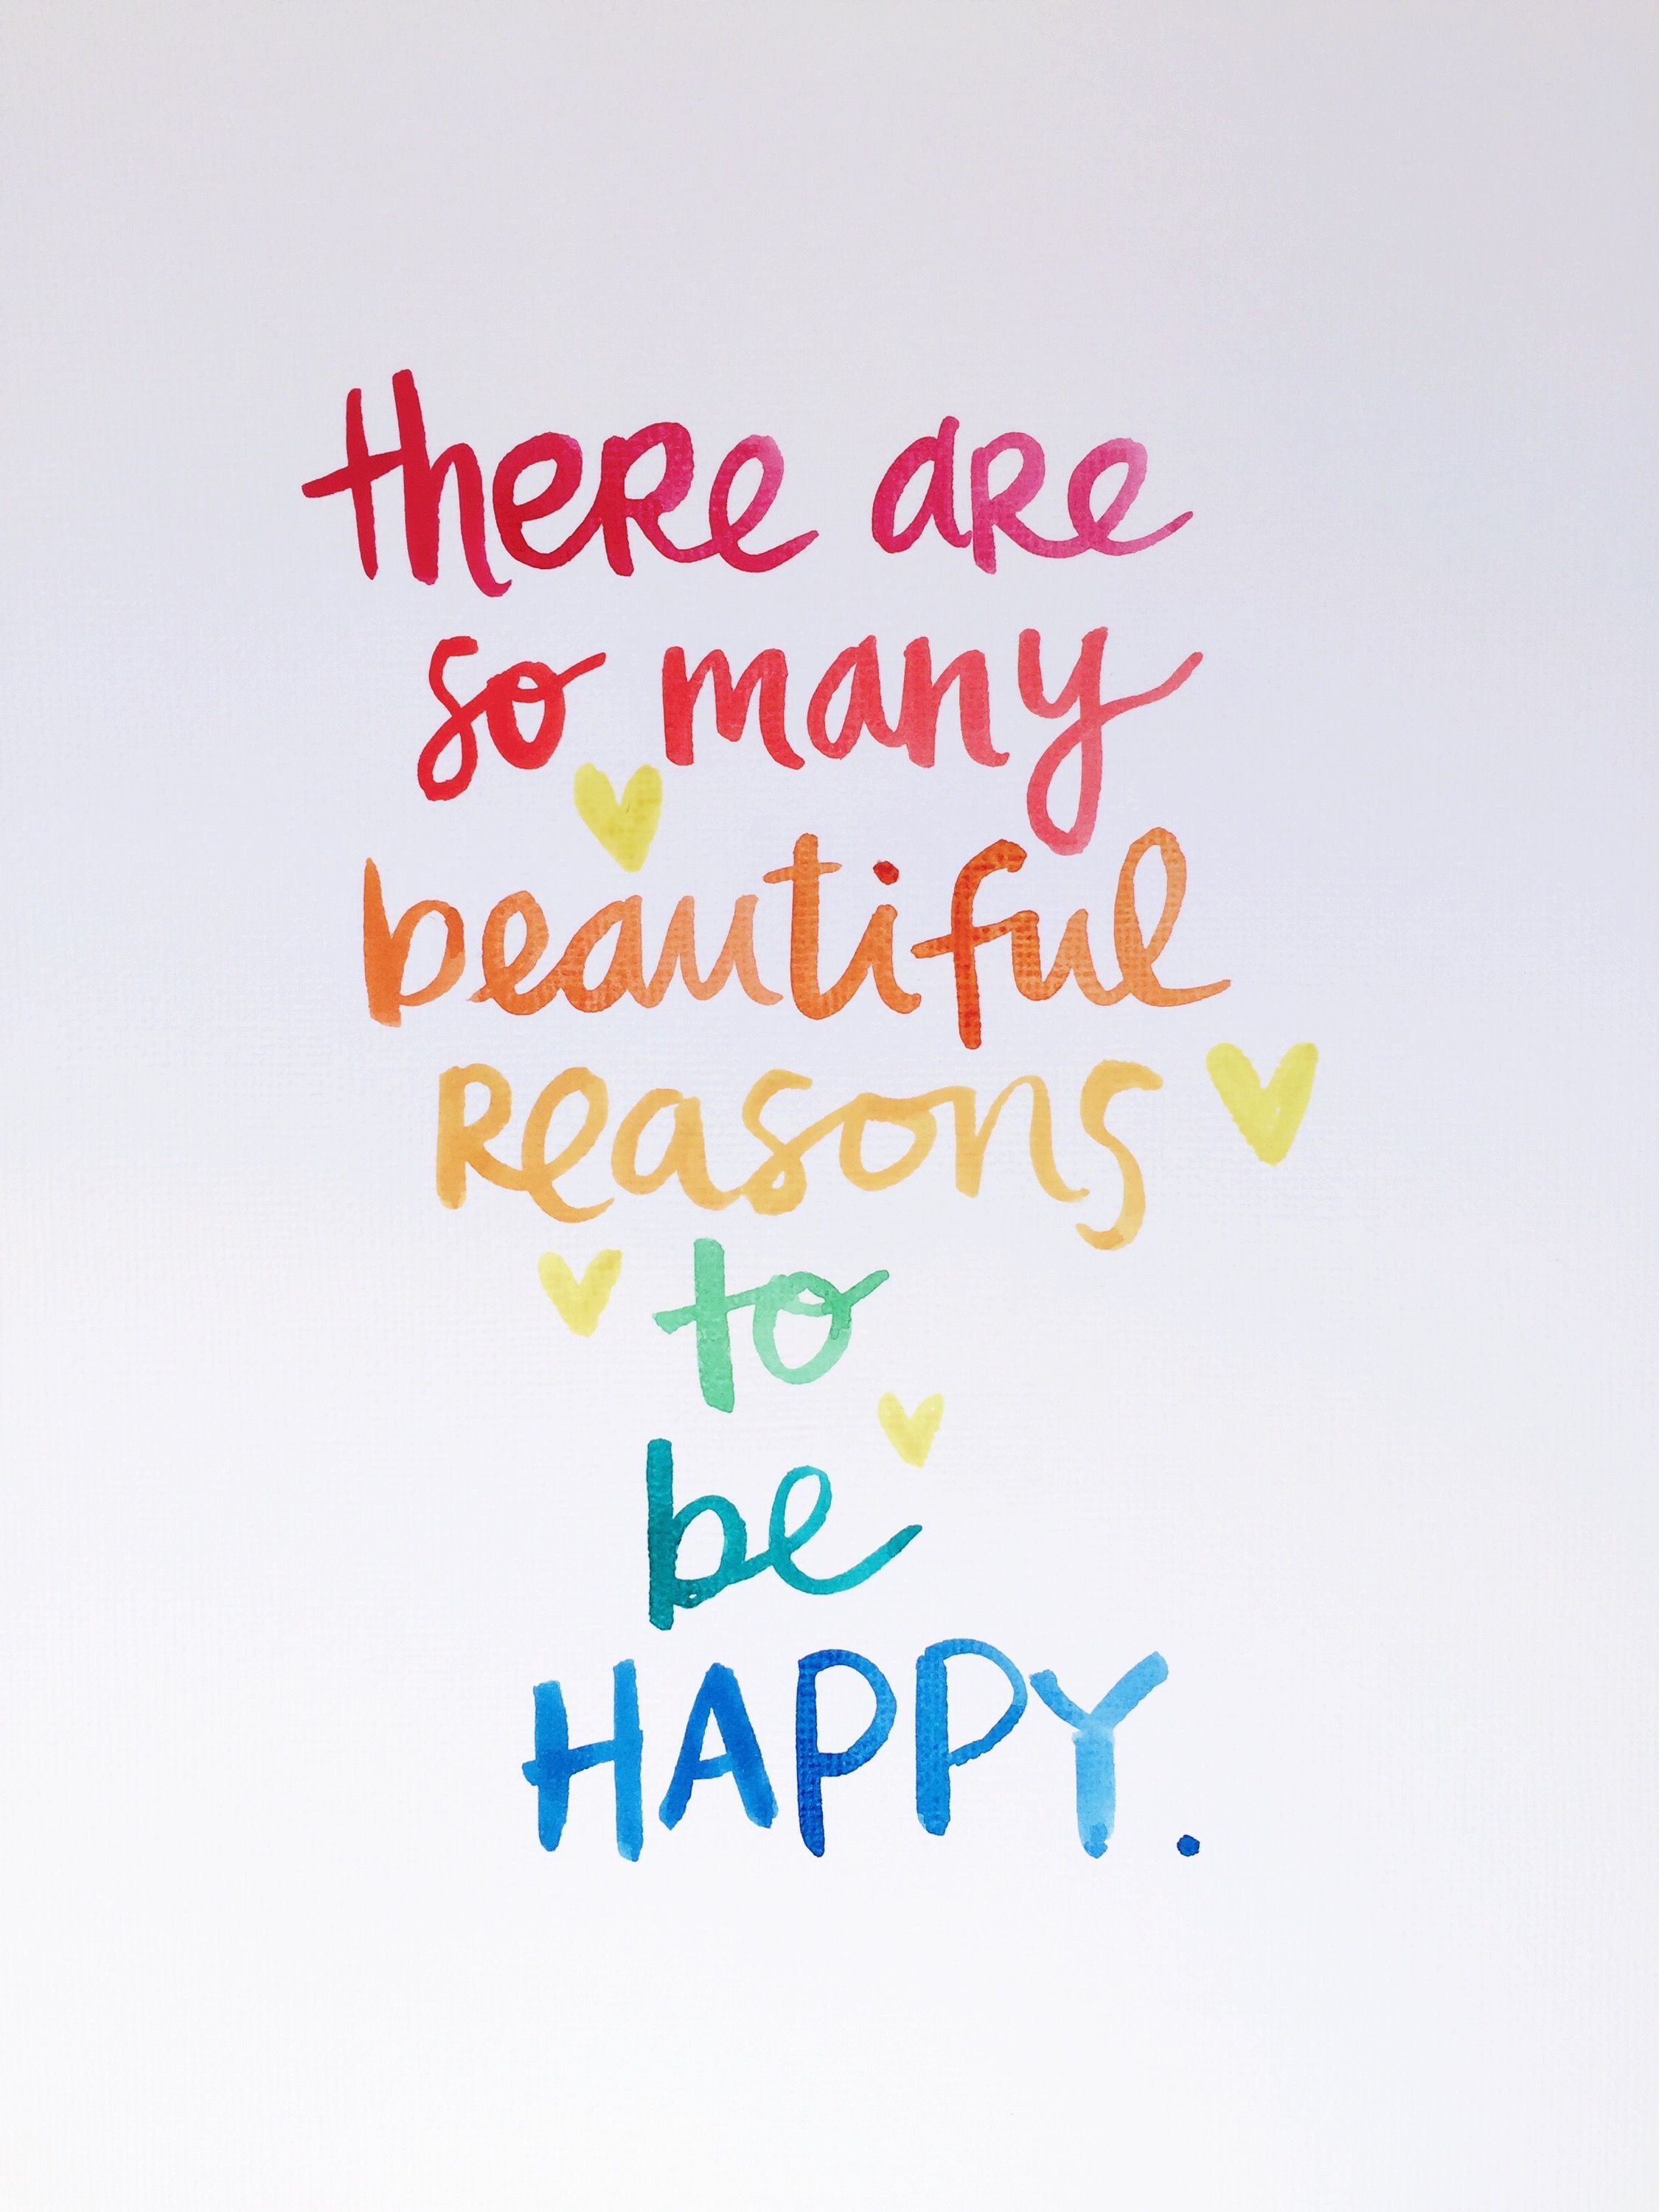 There are so many beautiful reasons to be